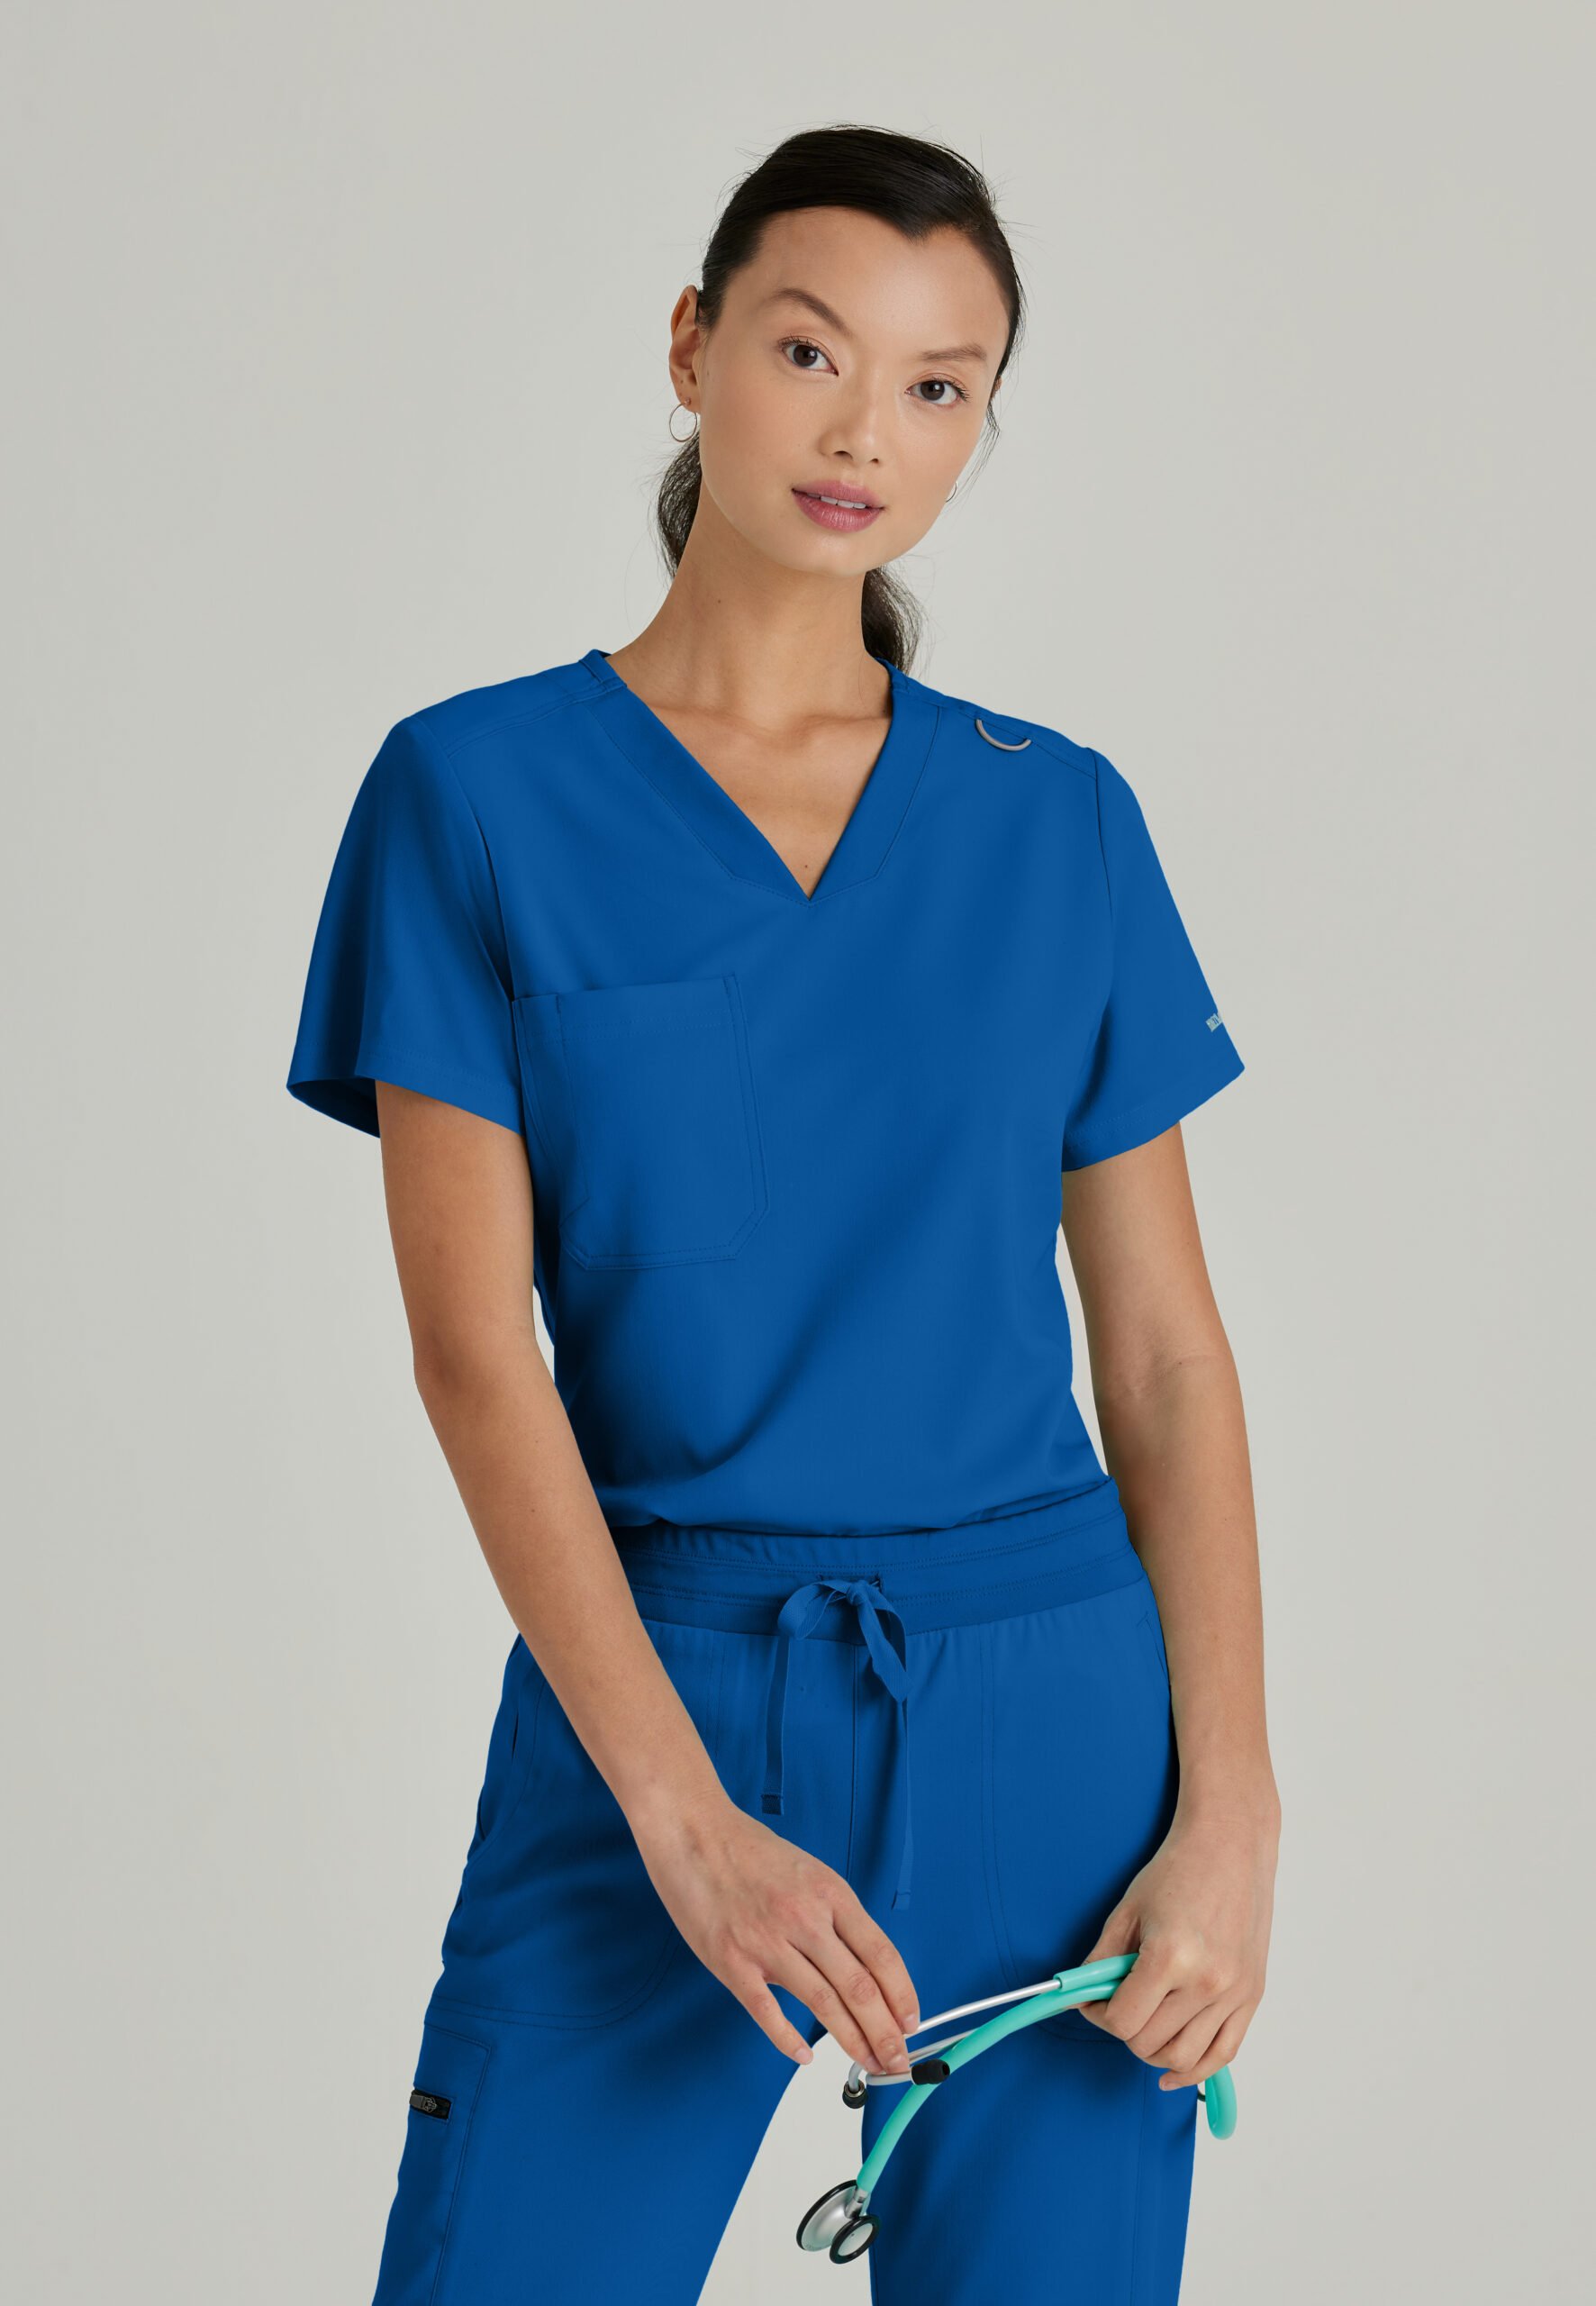 This company's stylish scrubs help doctors and nurses look